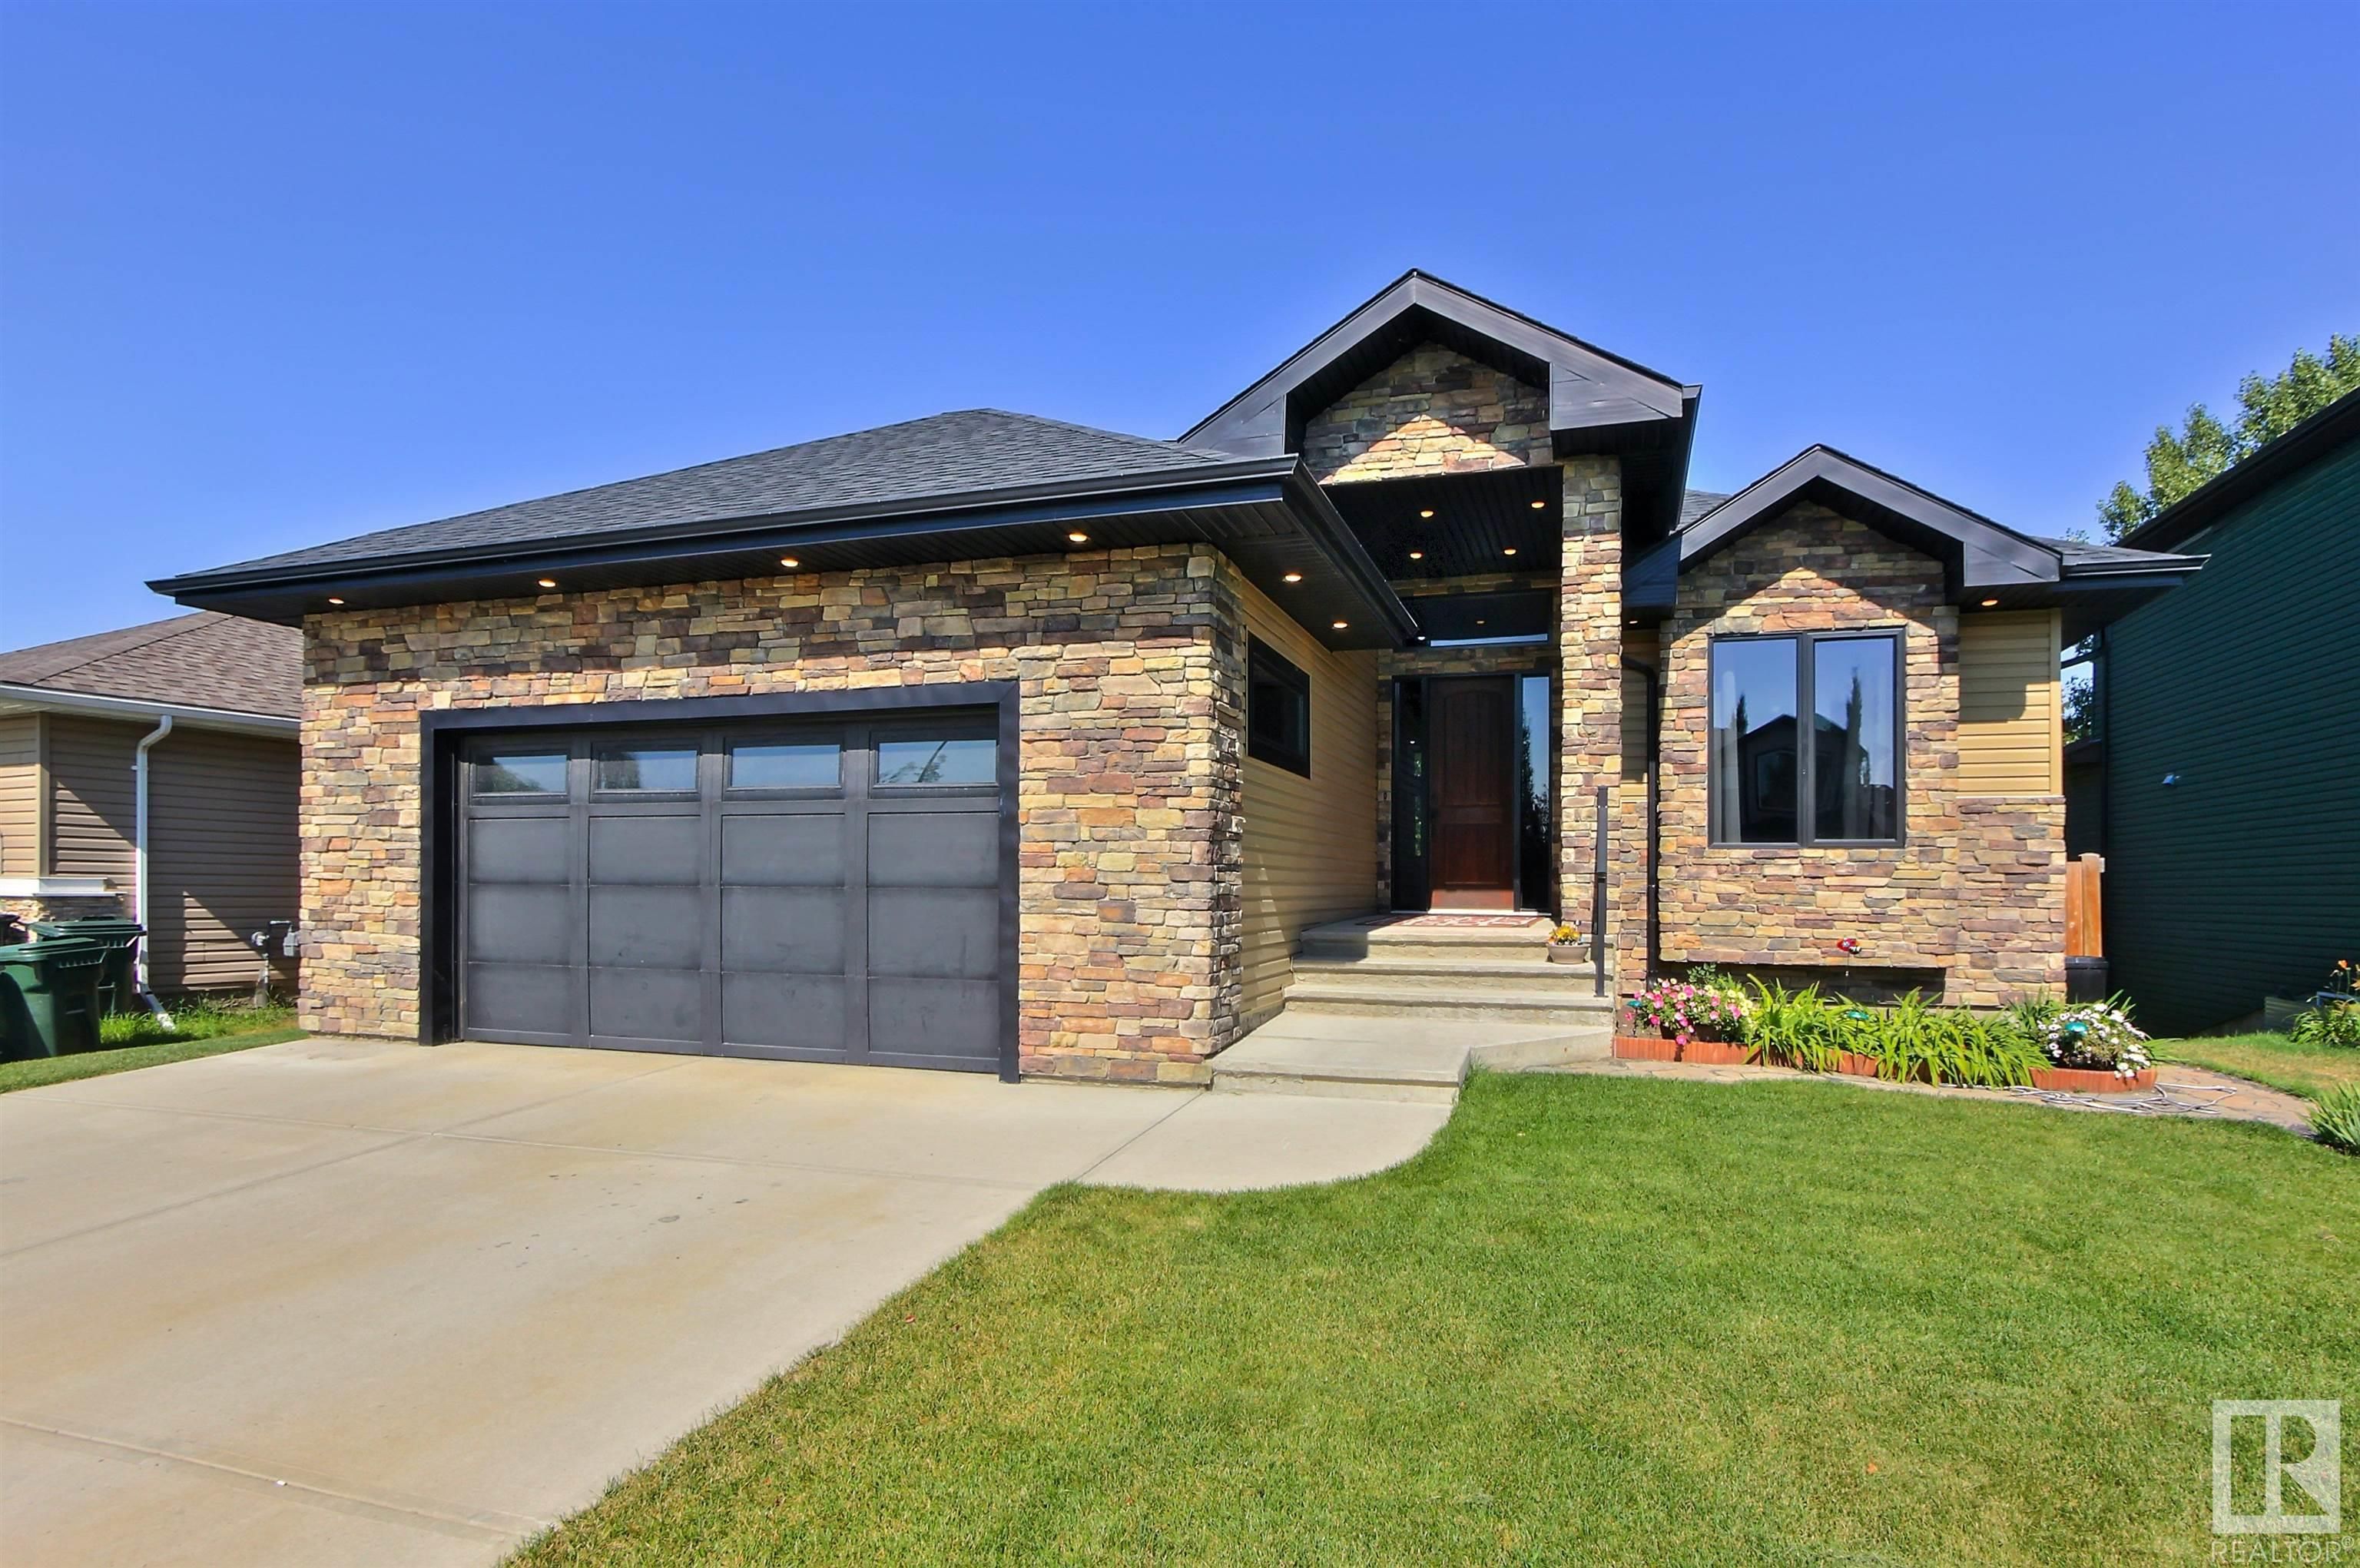 Main Photo: 38 LINKSVIEW Drive: Spruce Grove House for sale : MLS®# E4260553